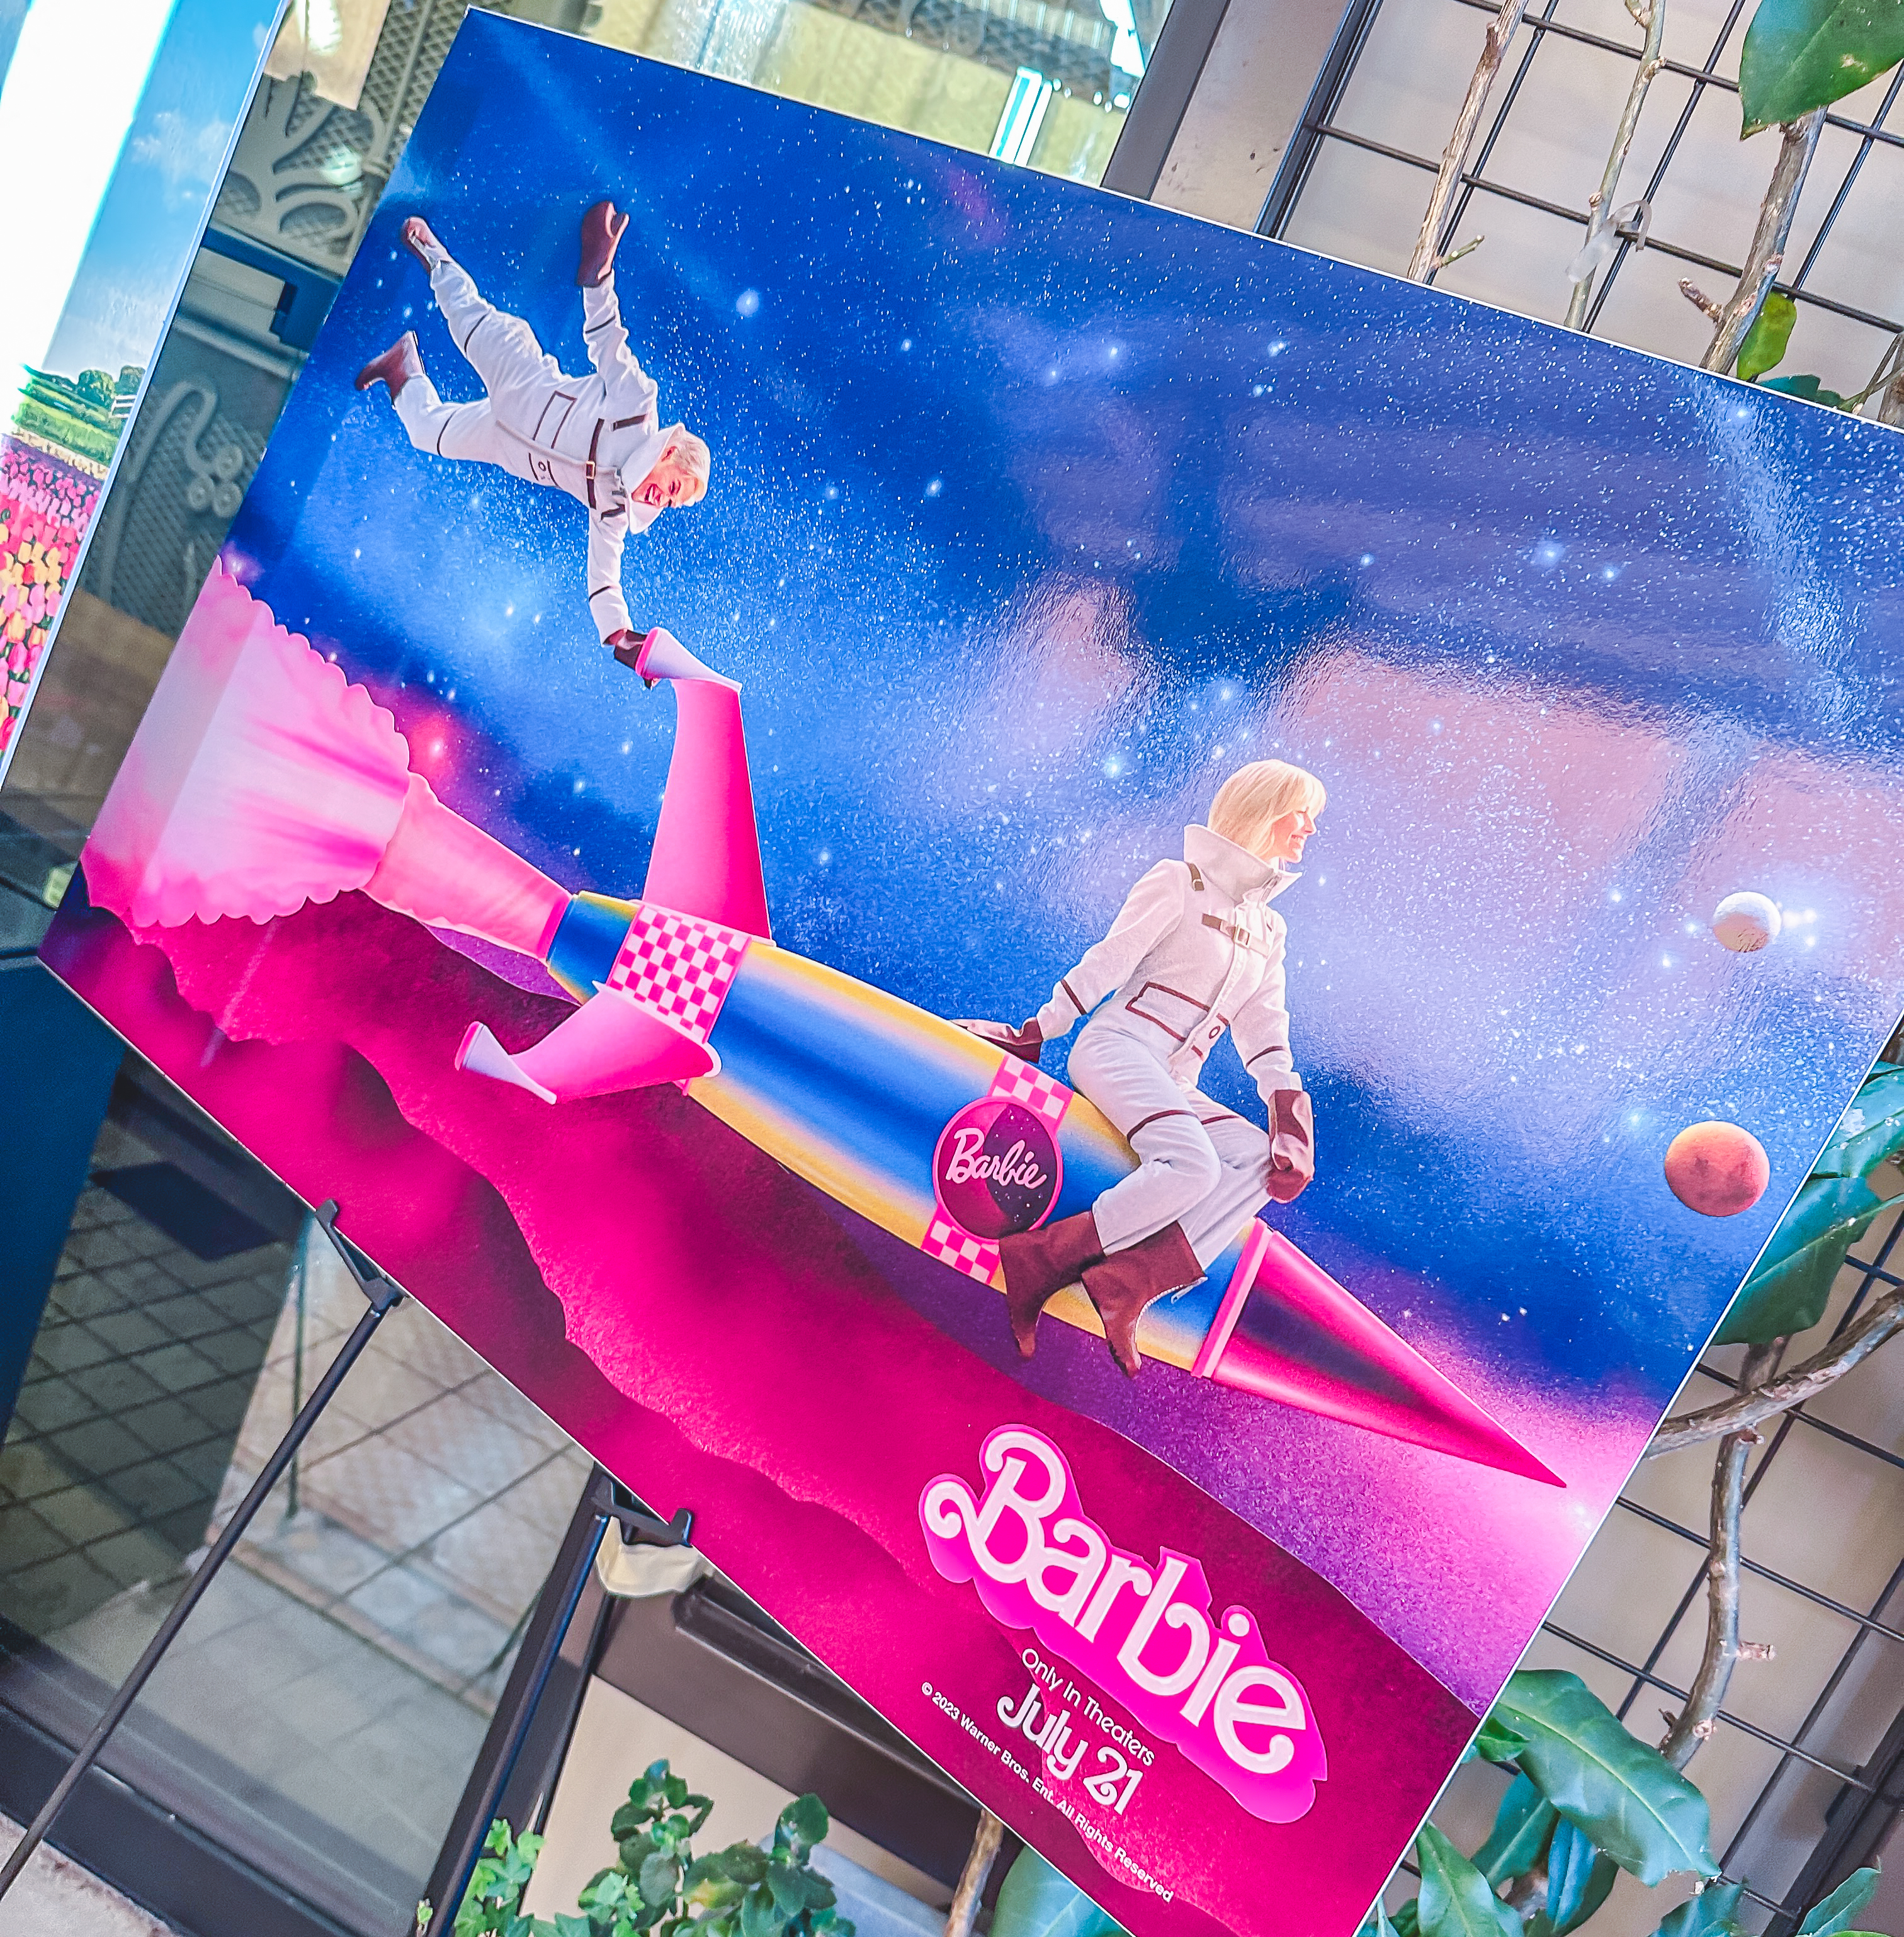 Poster of Barbie and Ken in astronaut suits riding a pink rocketship